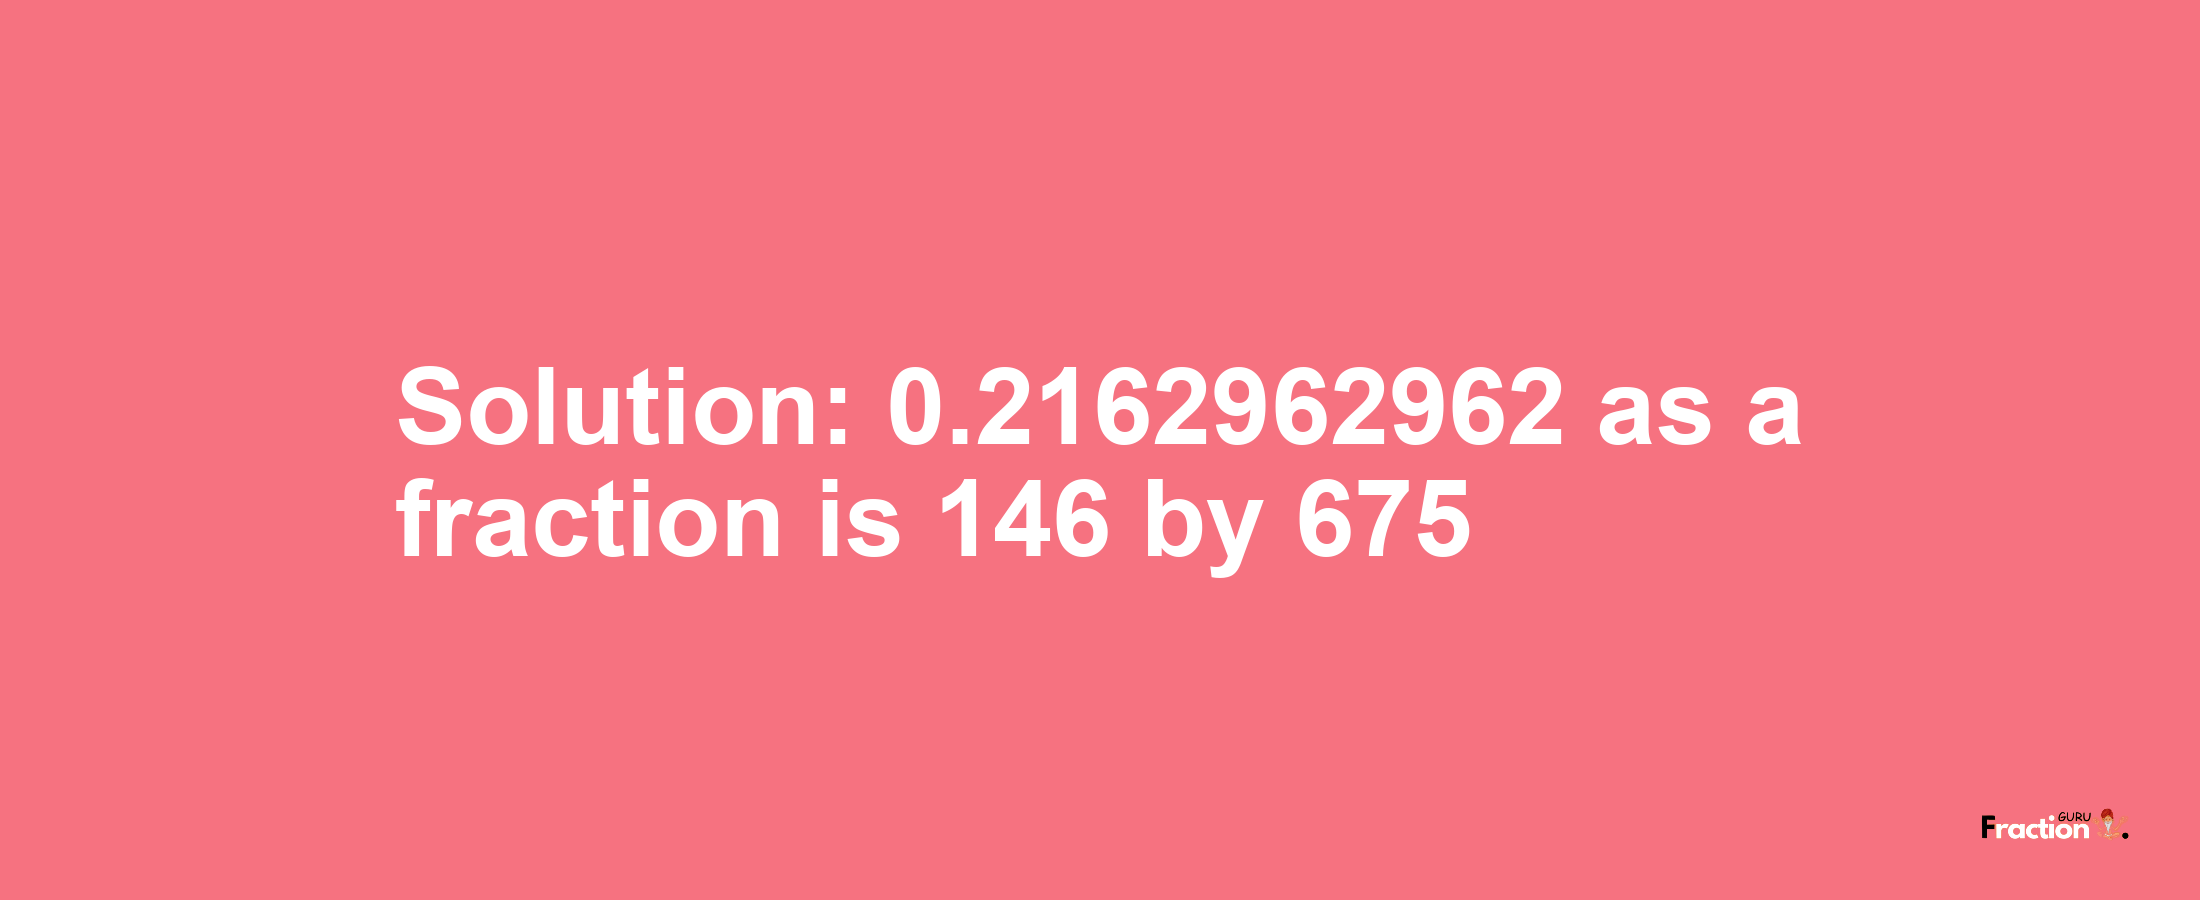 Solution:0.2162962962 as a fraction is 146/675